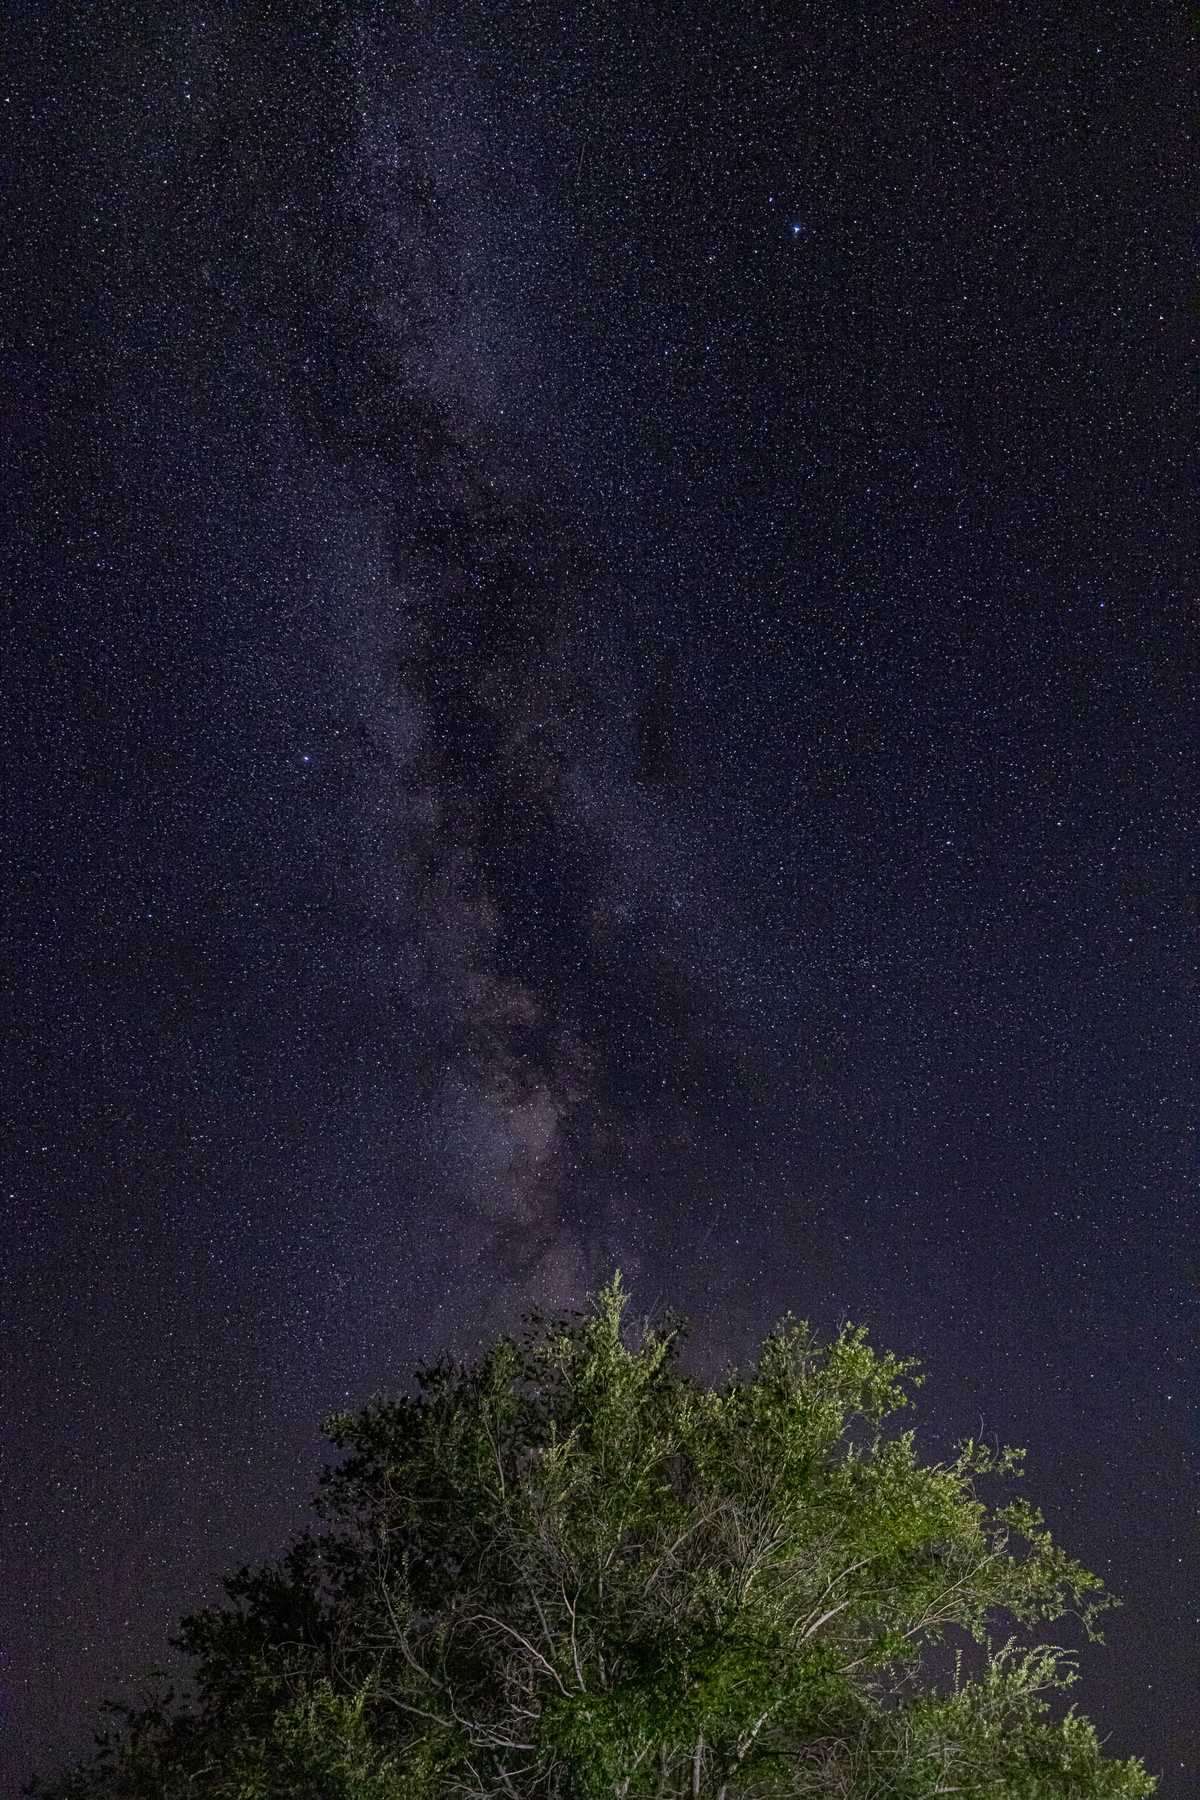 The Milky Way above a well-lit tree